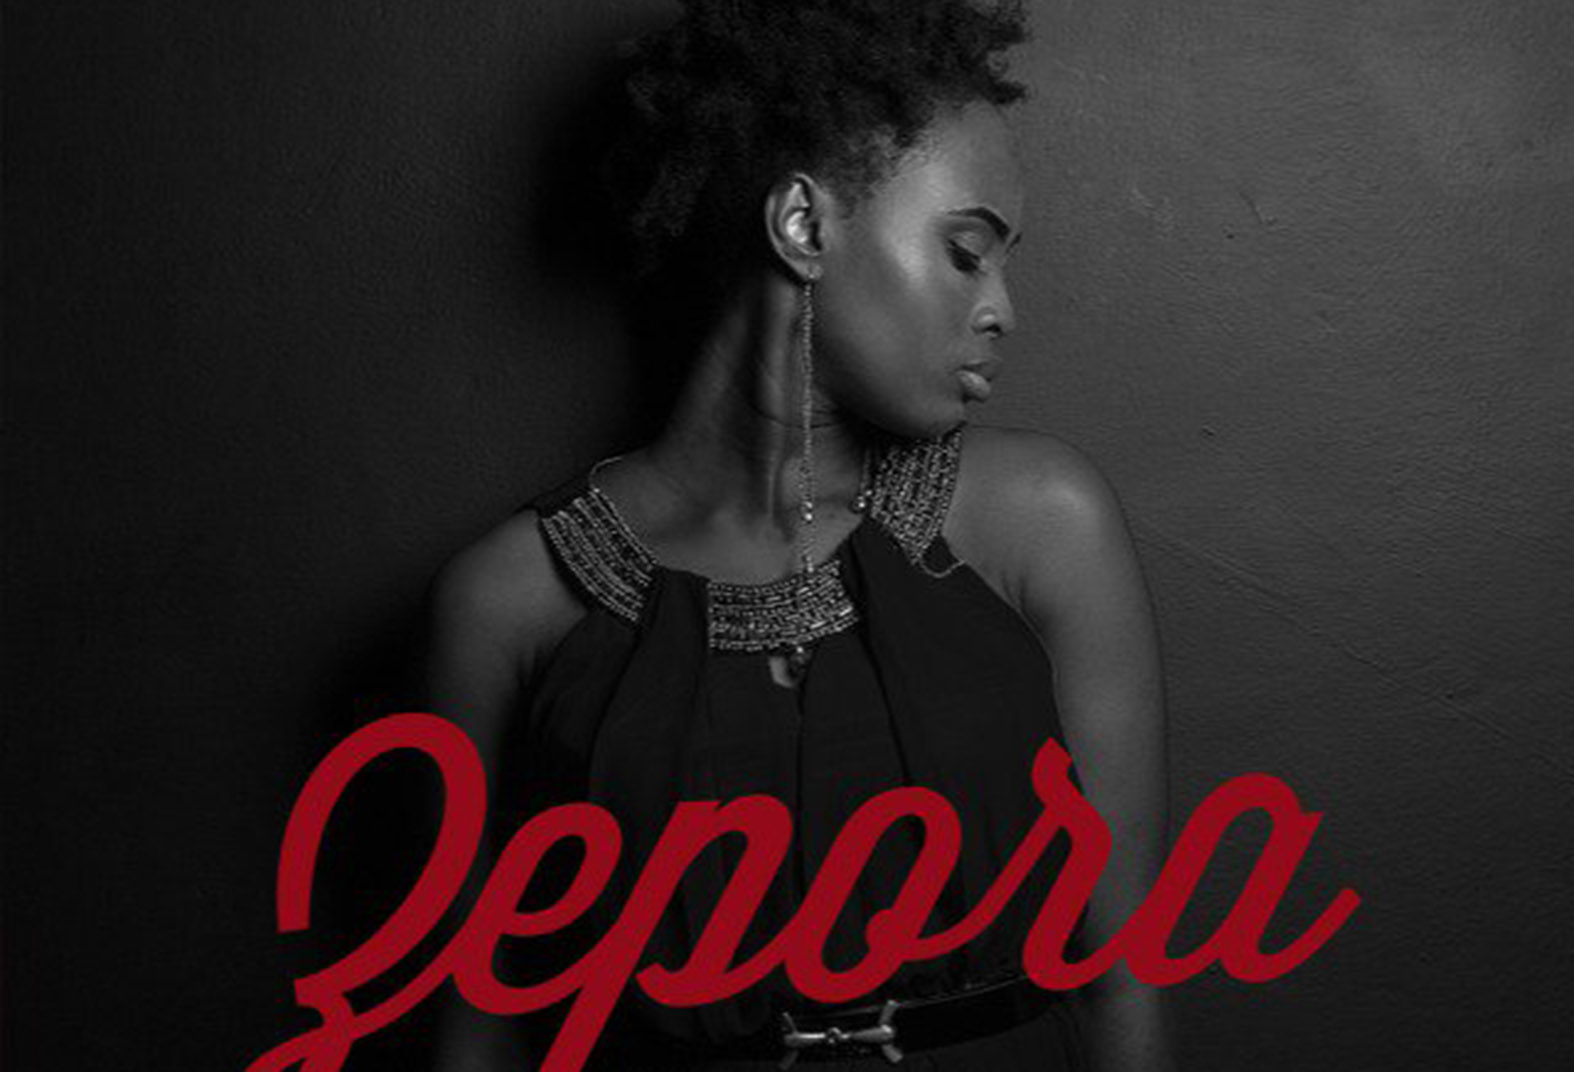 Zeporah Dickson will move you with her rhythmic songs